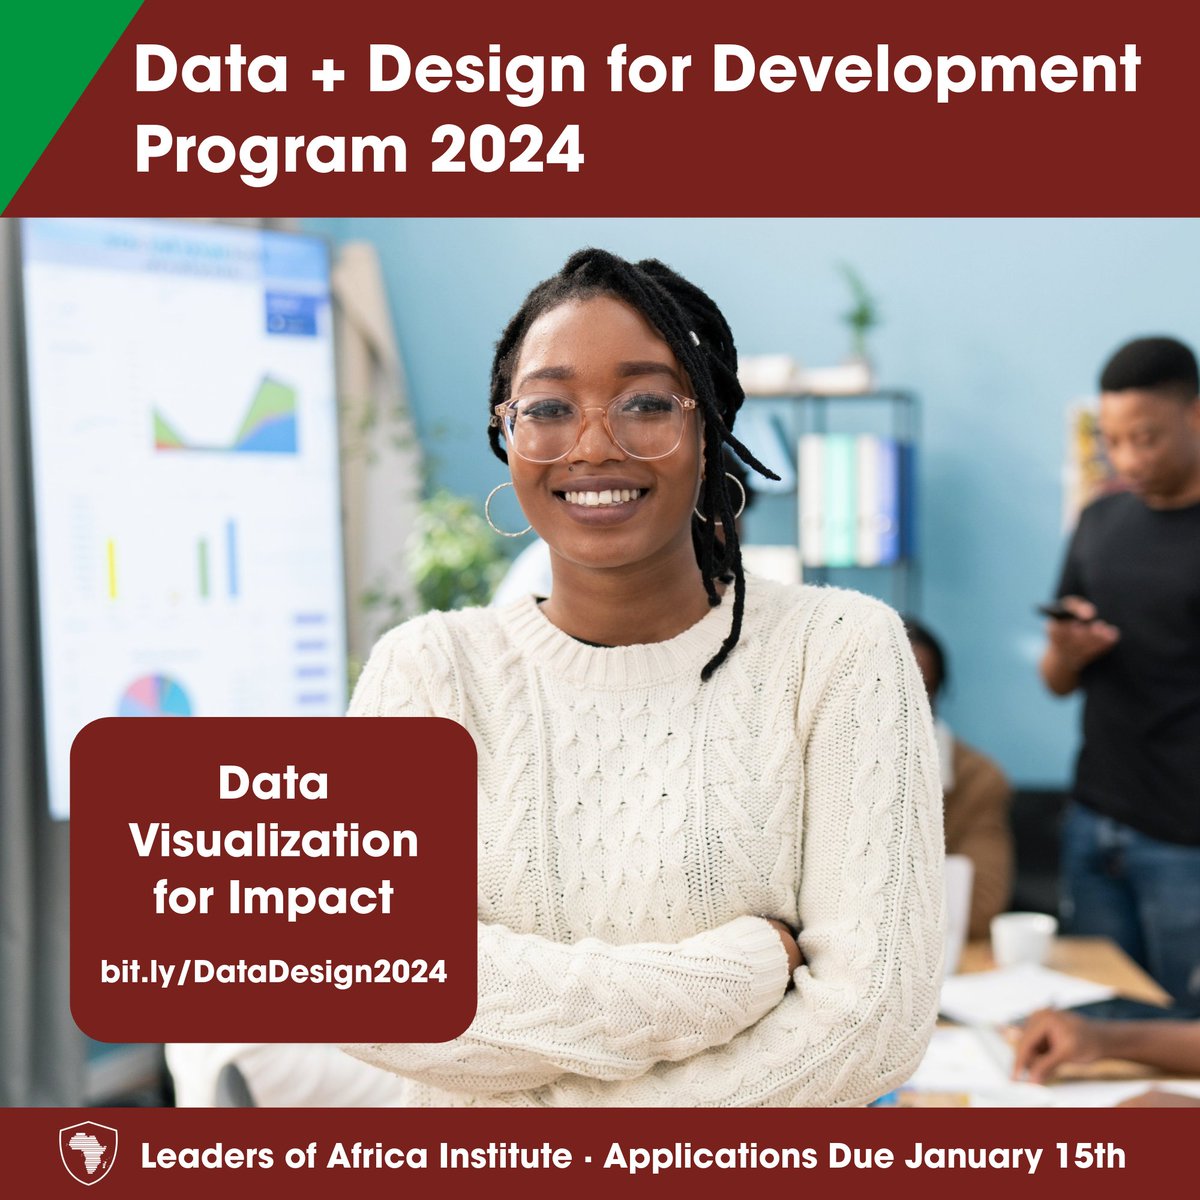 Just one more week until the application deadline on Monday, Jan 15th for the Data + Design for Development Program 2024. Accepted Scholars learn how to craft advanced data experiences in #Tableau, #PowerBi, #Datawrapper, and #Flourish Learn more >> bit.ly/DataDesign2024